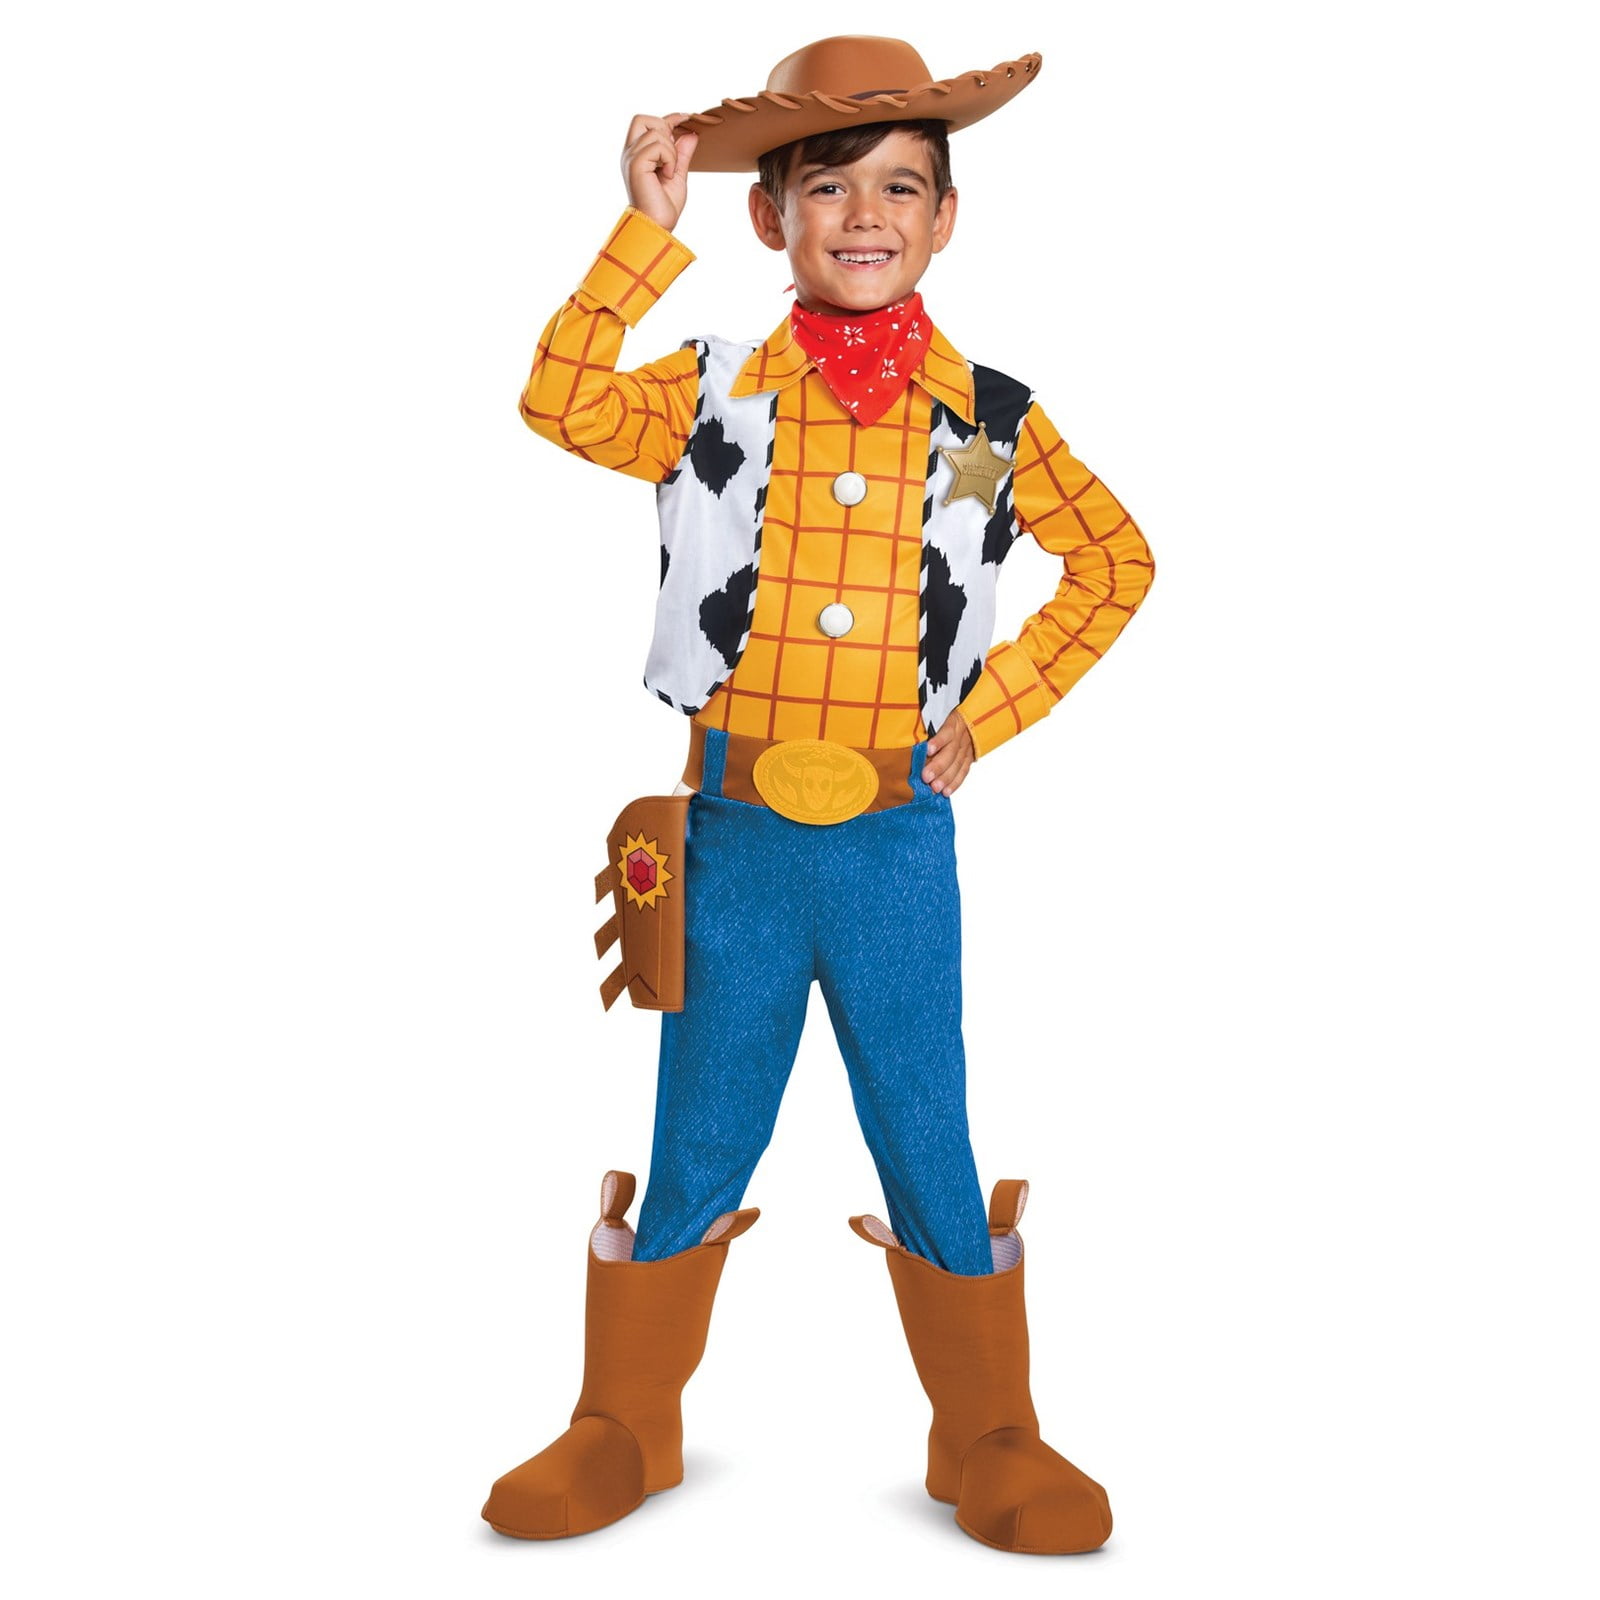 Details about   Disney Toy Story 4 Deluxe Woody Adult Costume Licensed Cowboy Sheriff LG-XL 